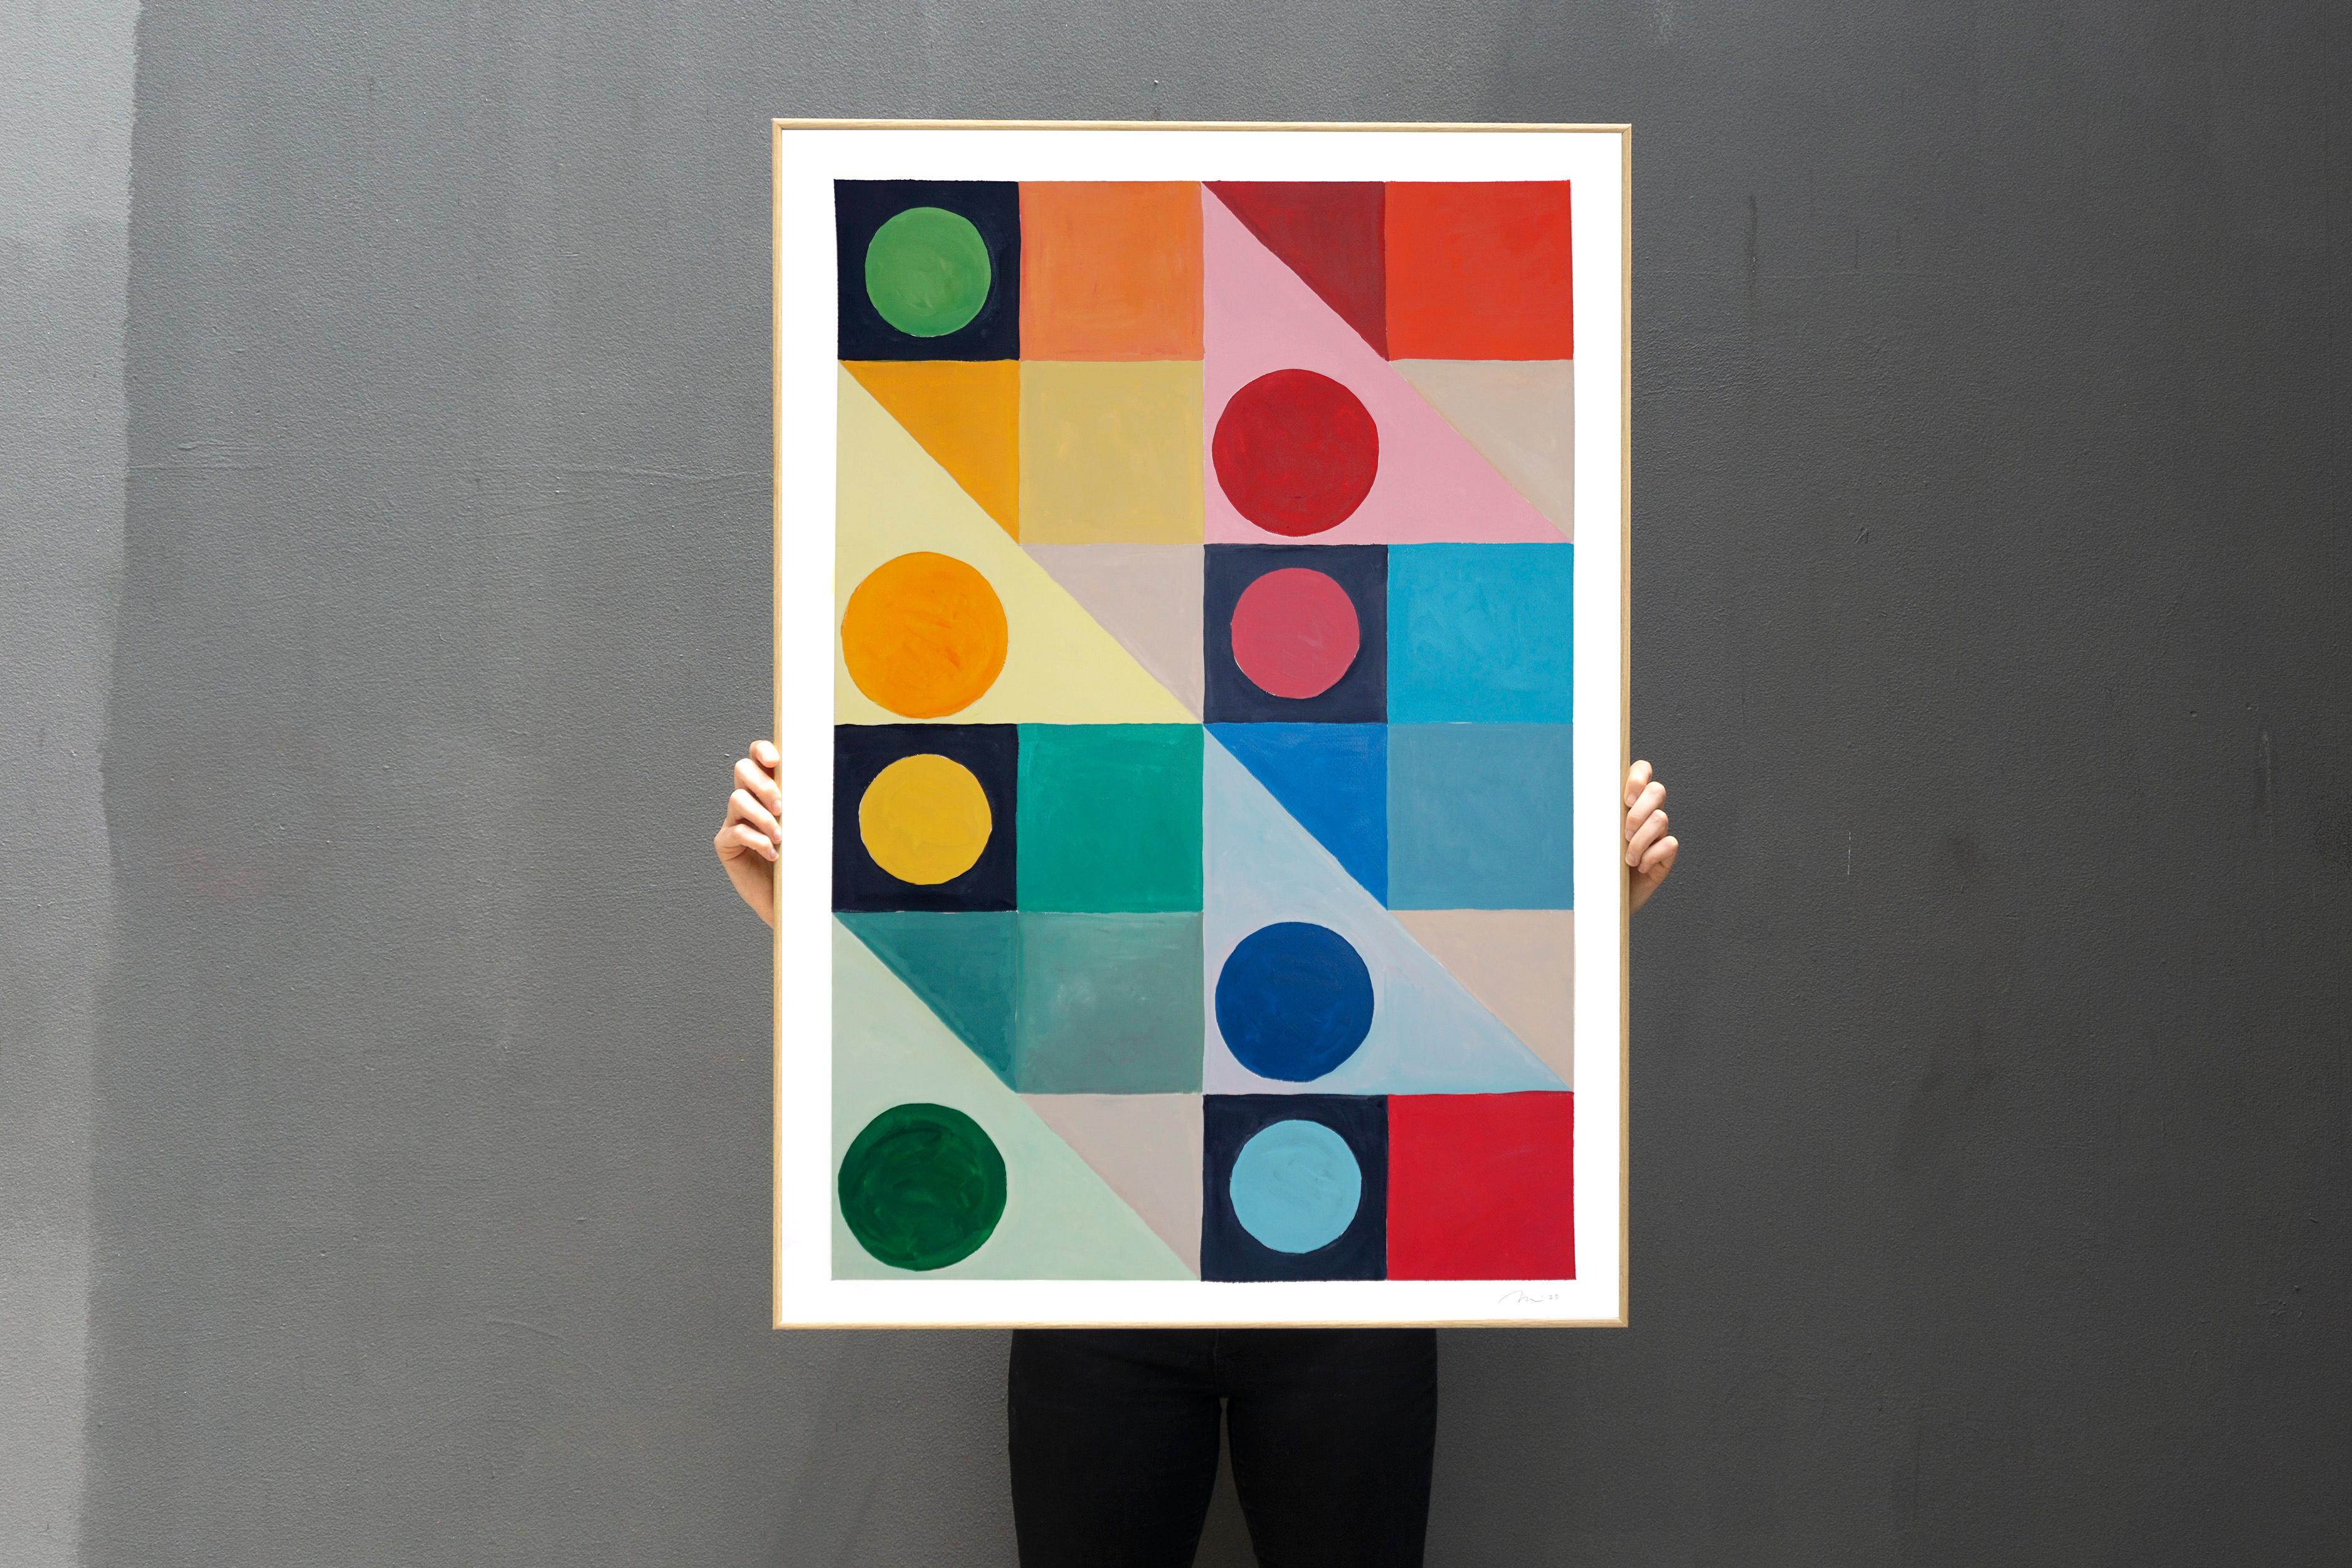 Primary Tones Geometric Rainbow, Vertical CMYK and Circles Squares, Red, Yellow - Painting by Natalia Roman